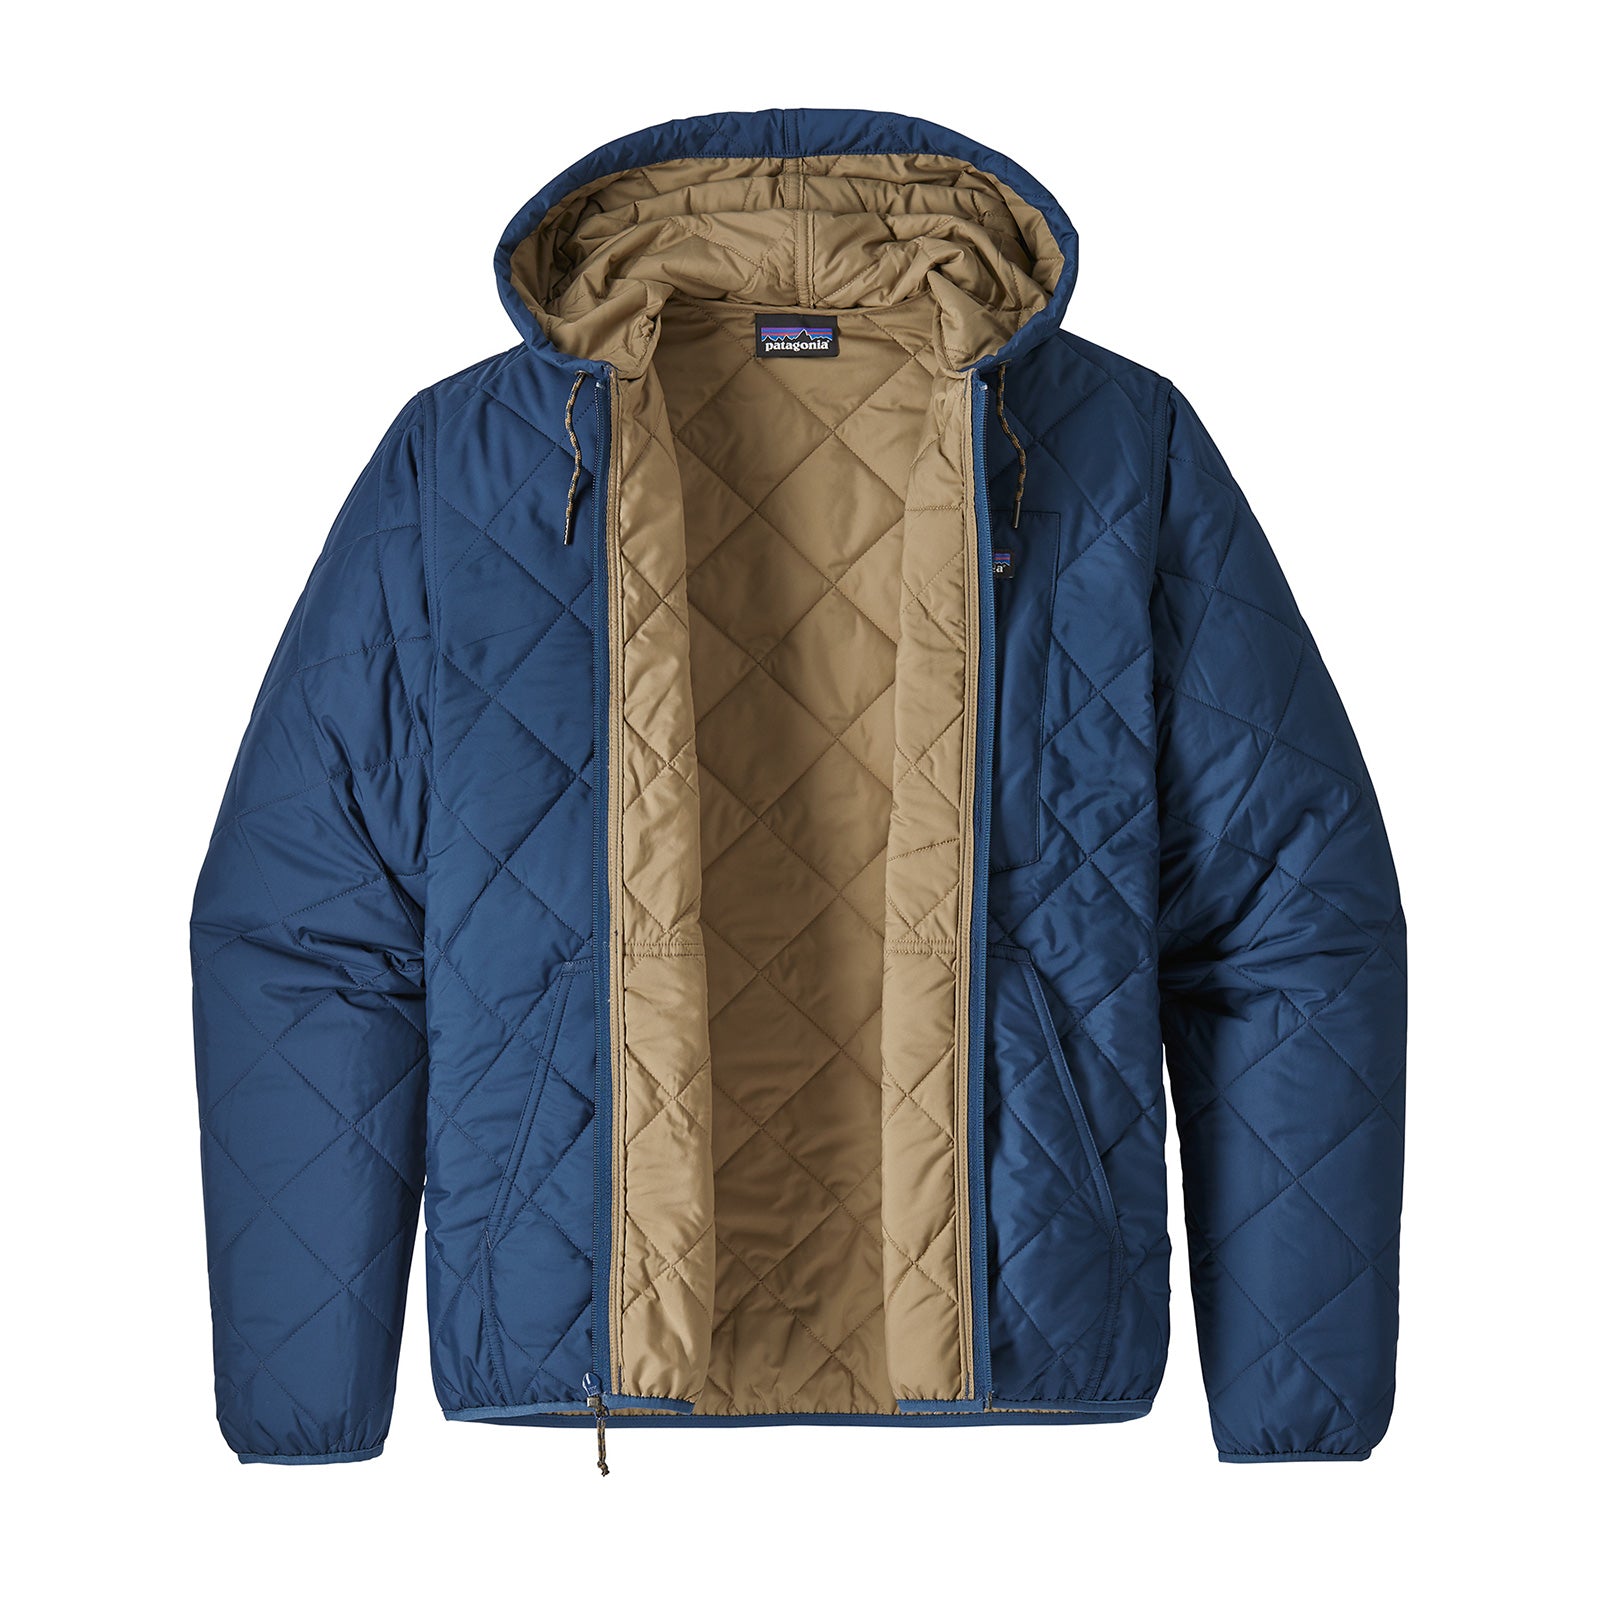 front view of the diamond quilted hoody with the zipper down showing the tan interior